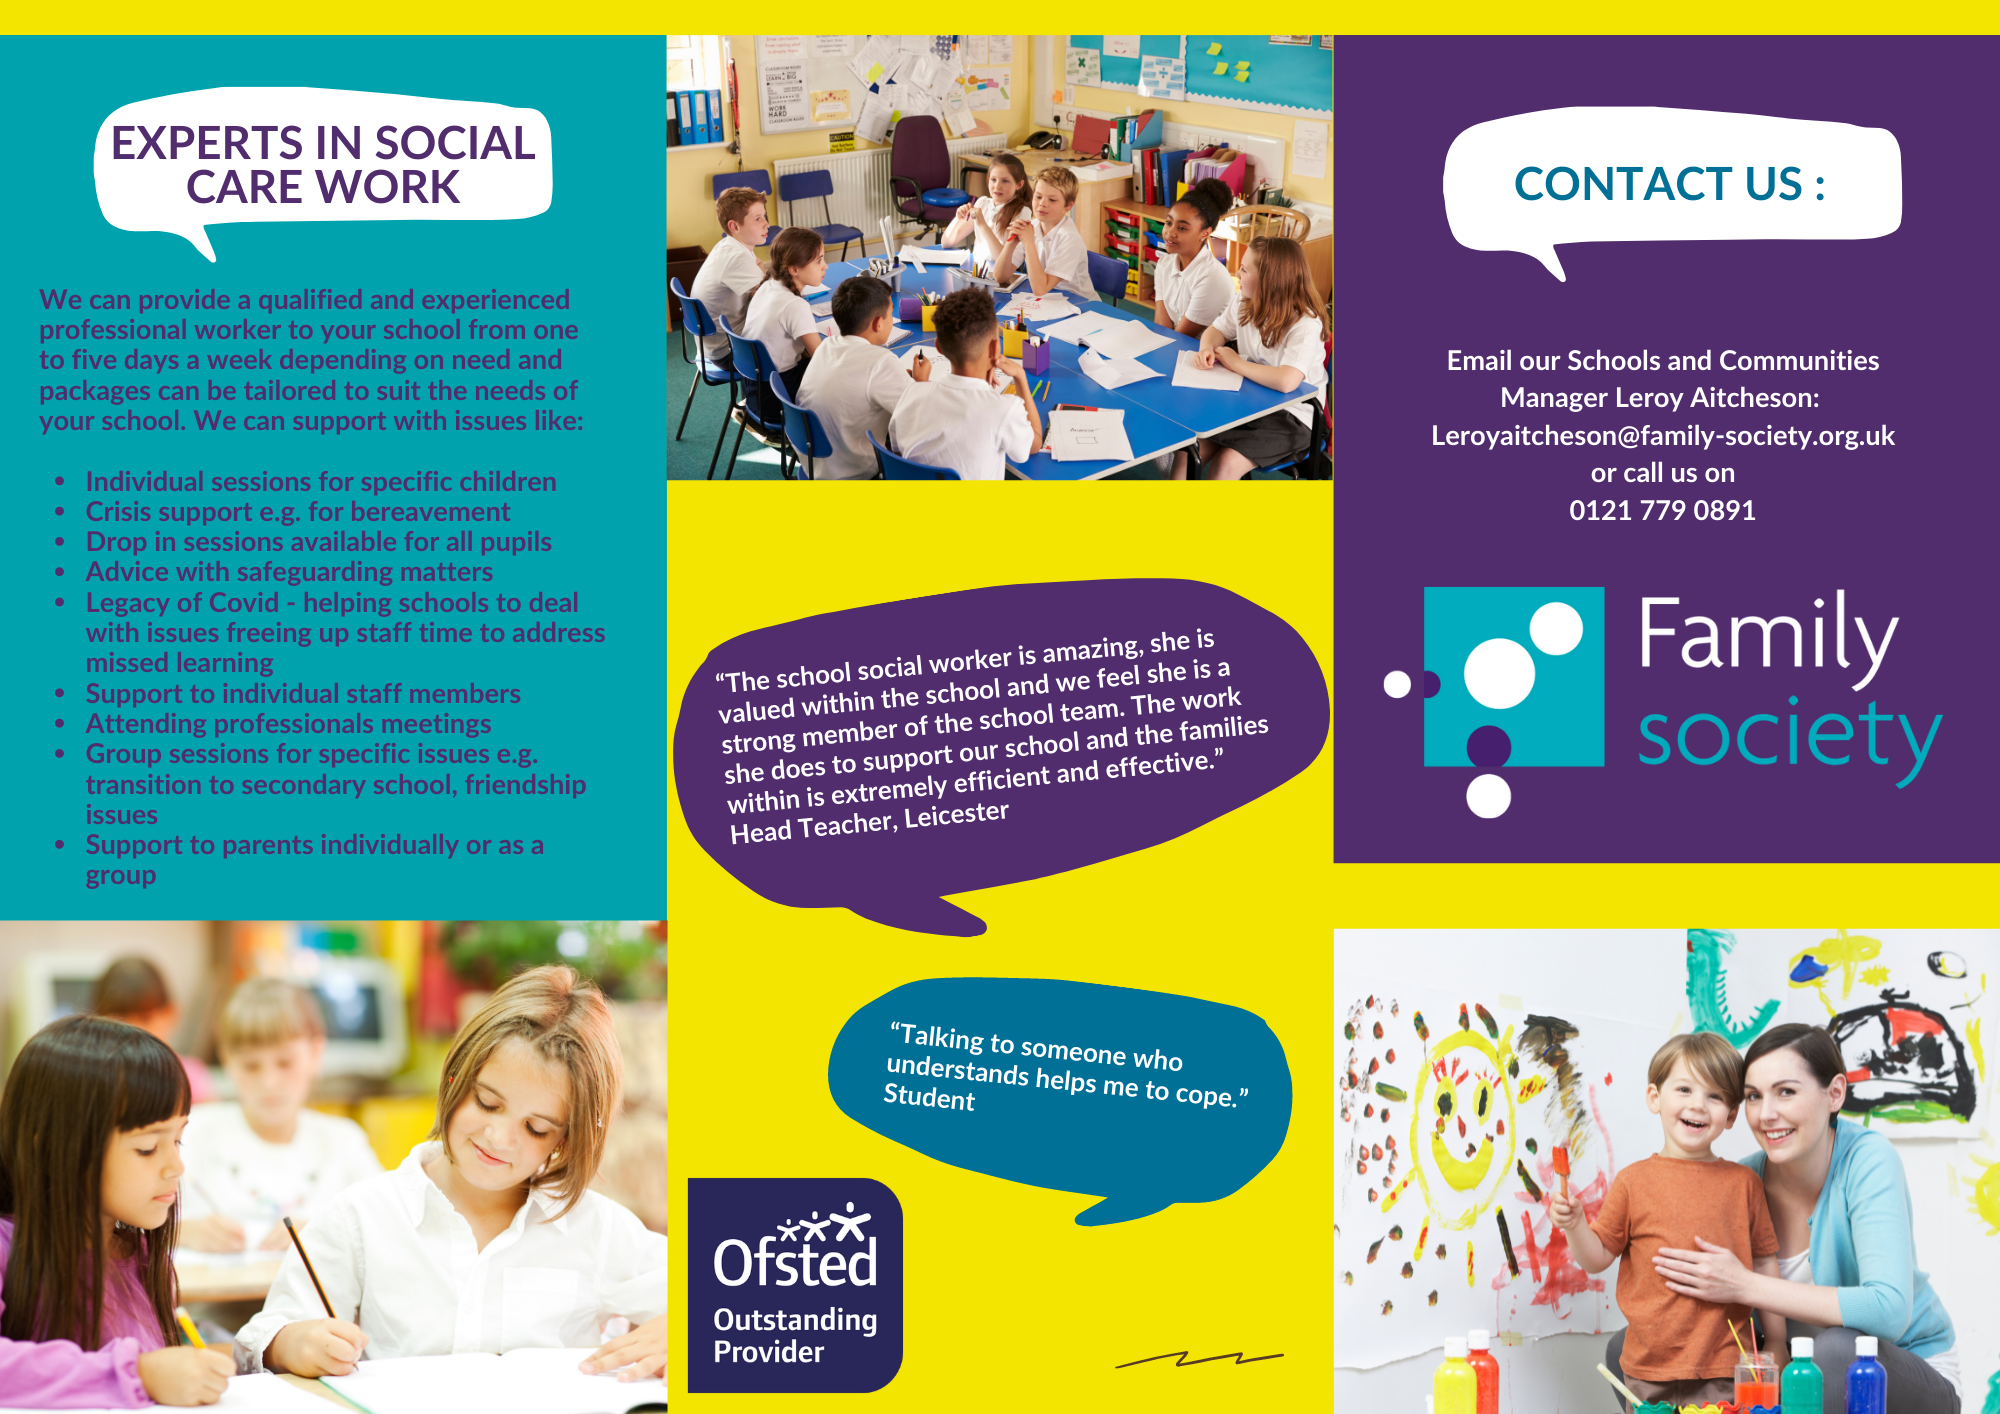 All you need to know about our school's social care service